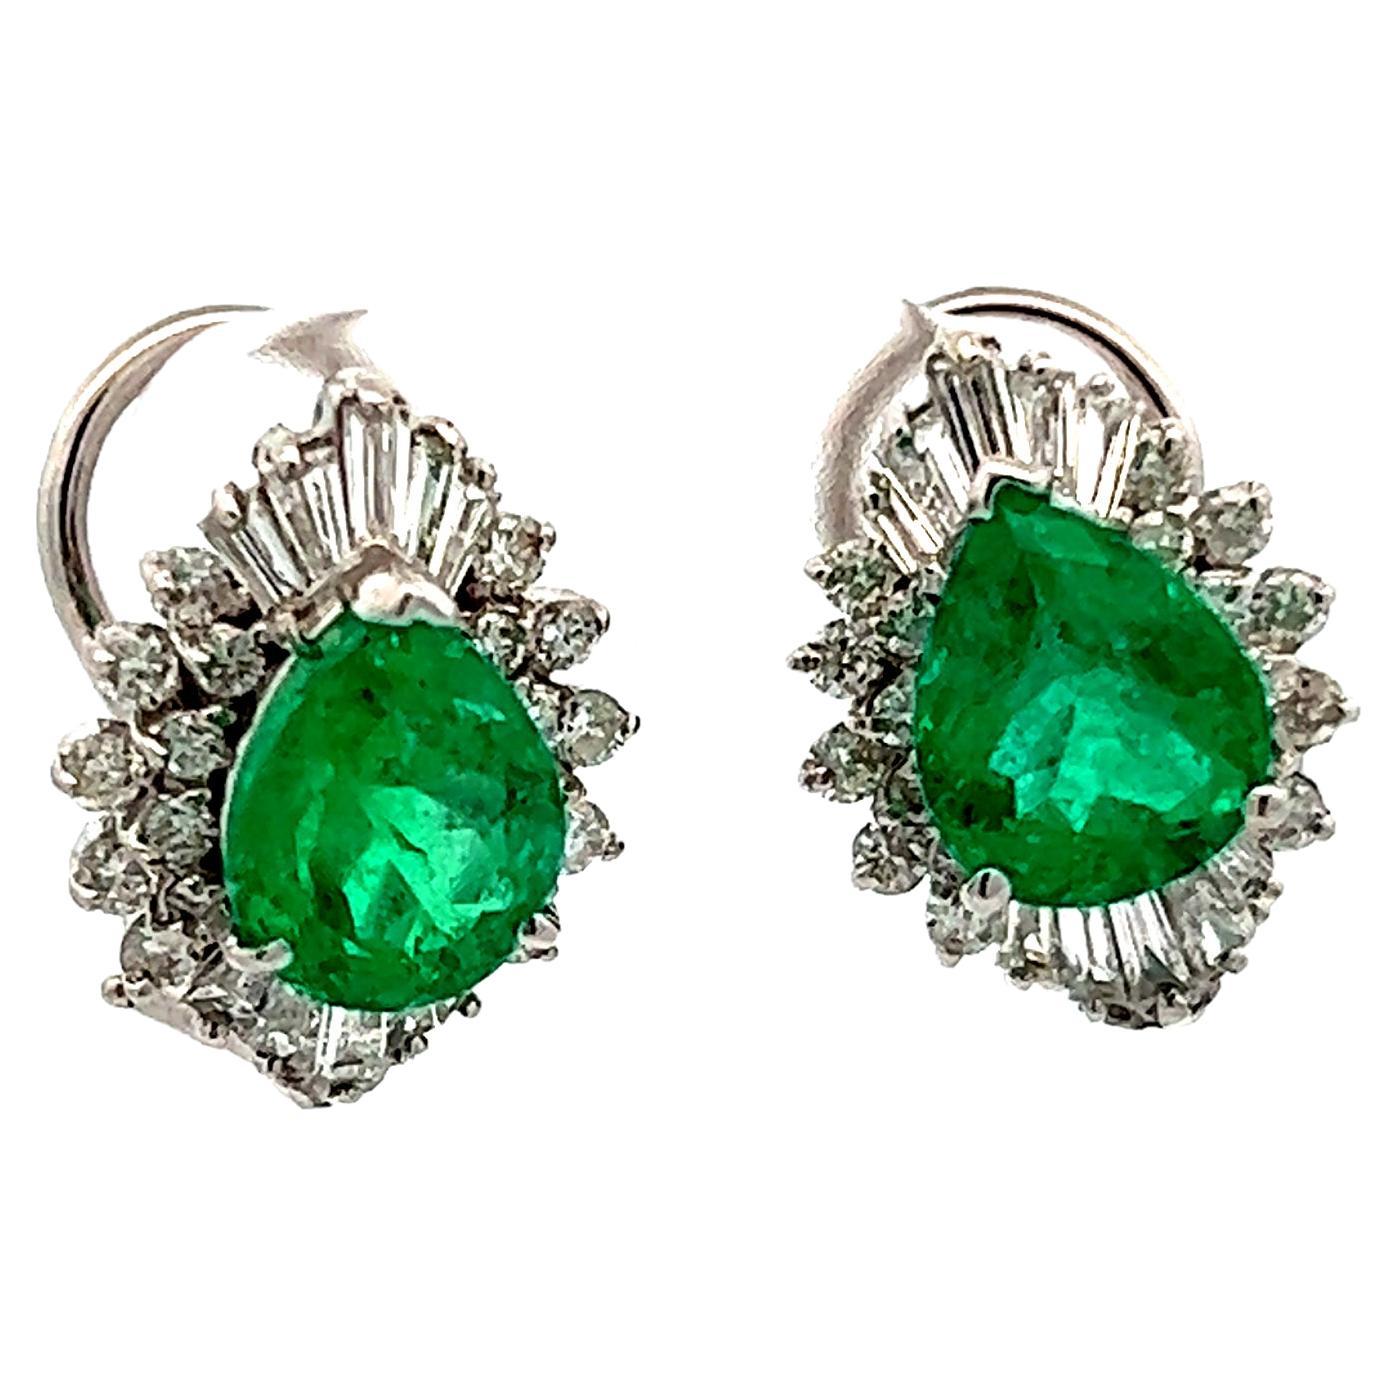 Contemporary 14k White Gold Emerald and Diamond Earrings 